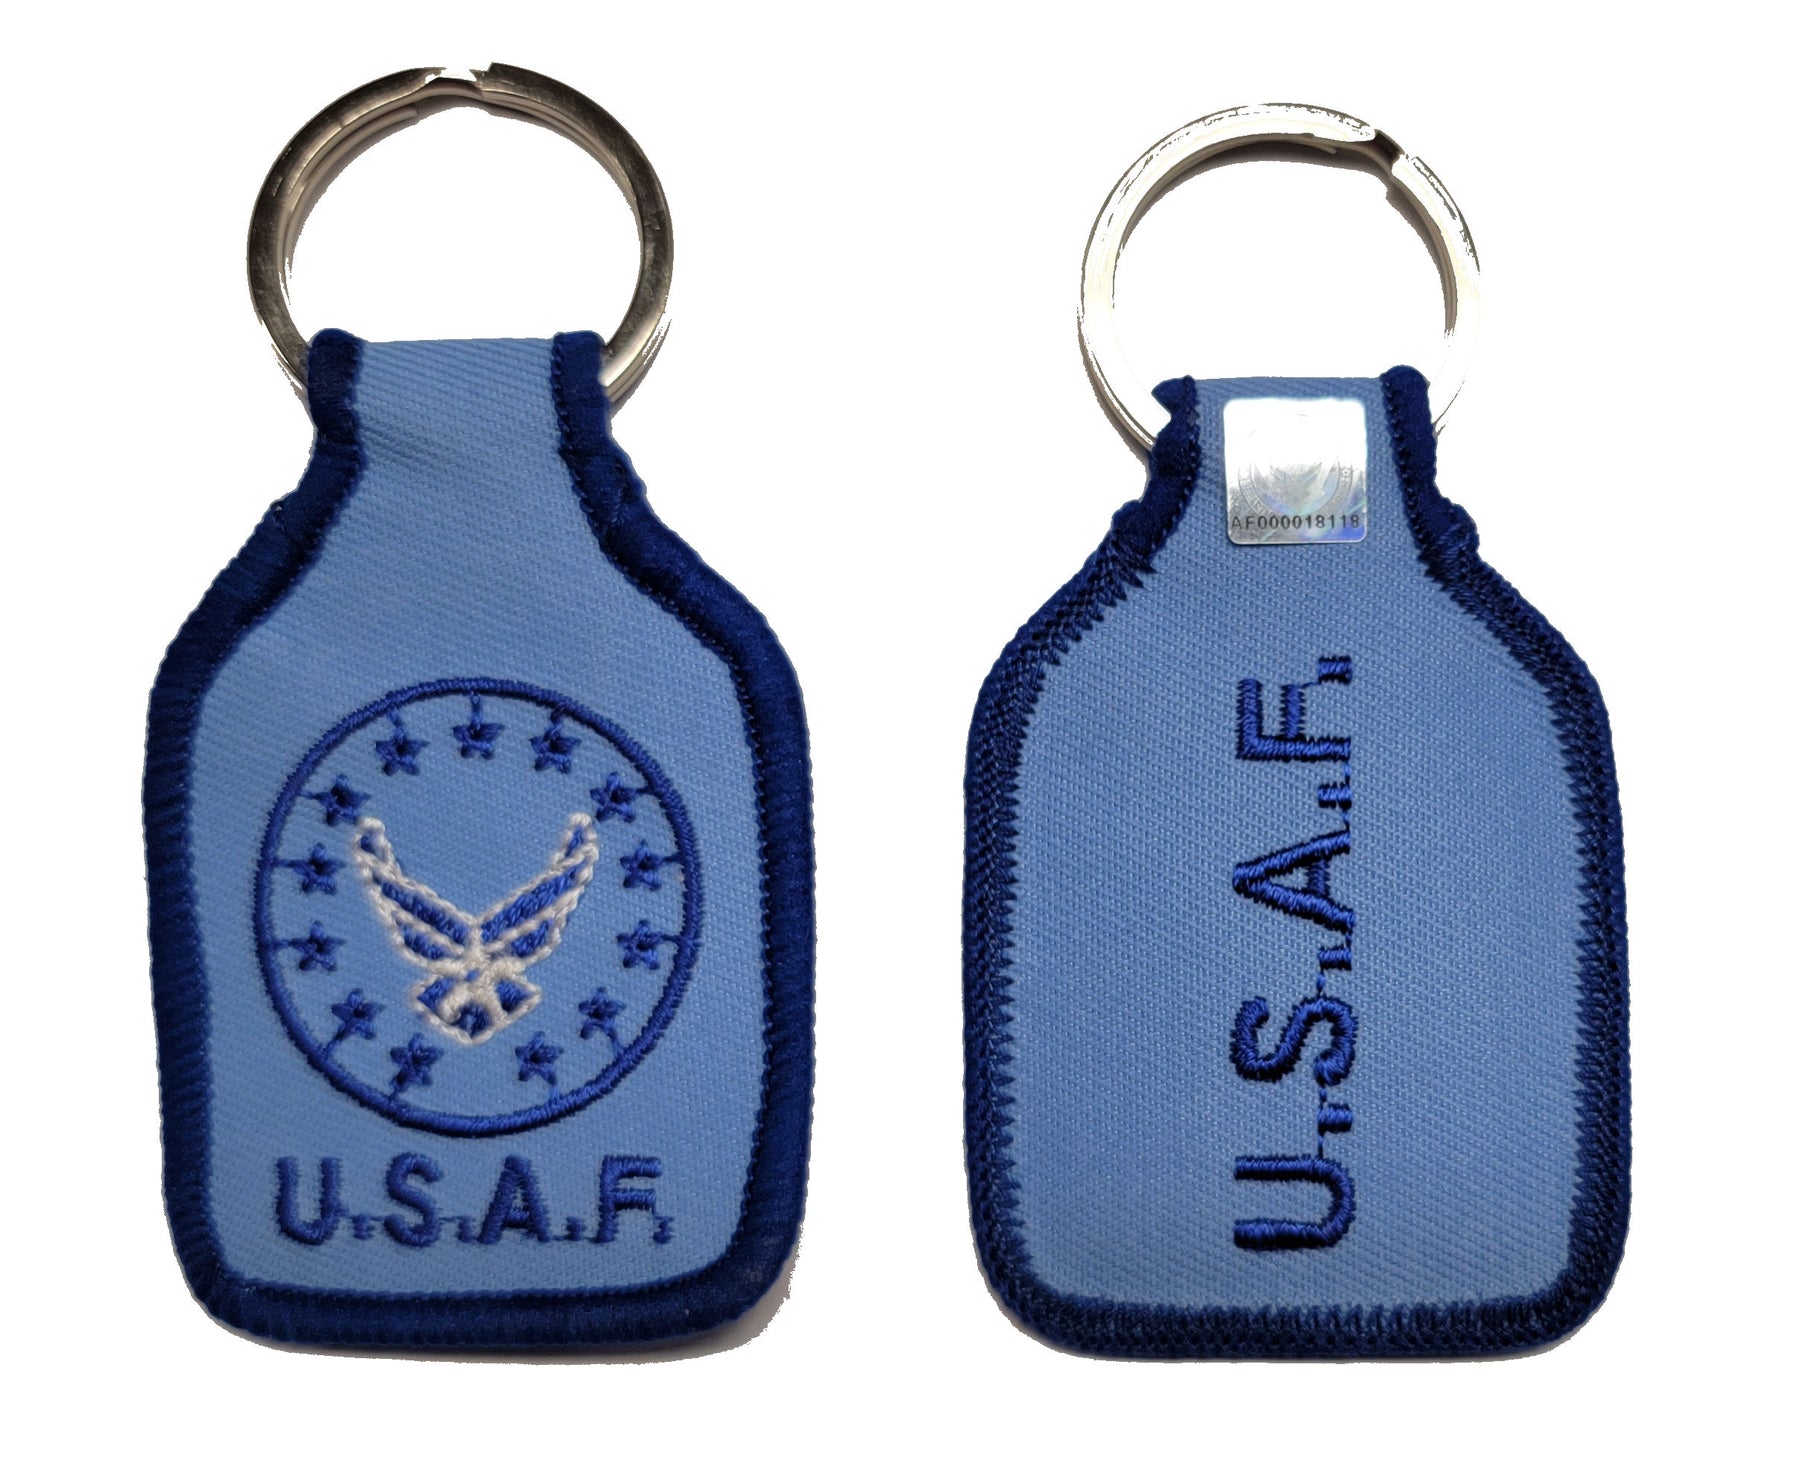 CLEARANCE - Embroidered Key Chain - USAF WINGED SEAL